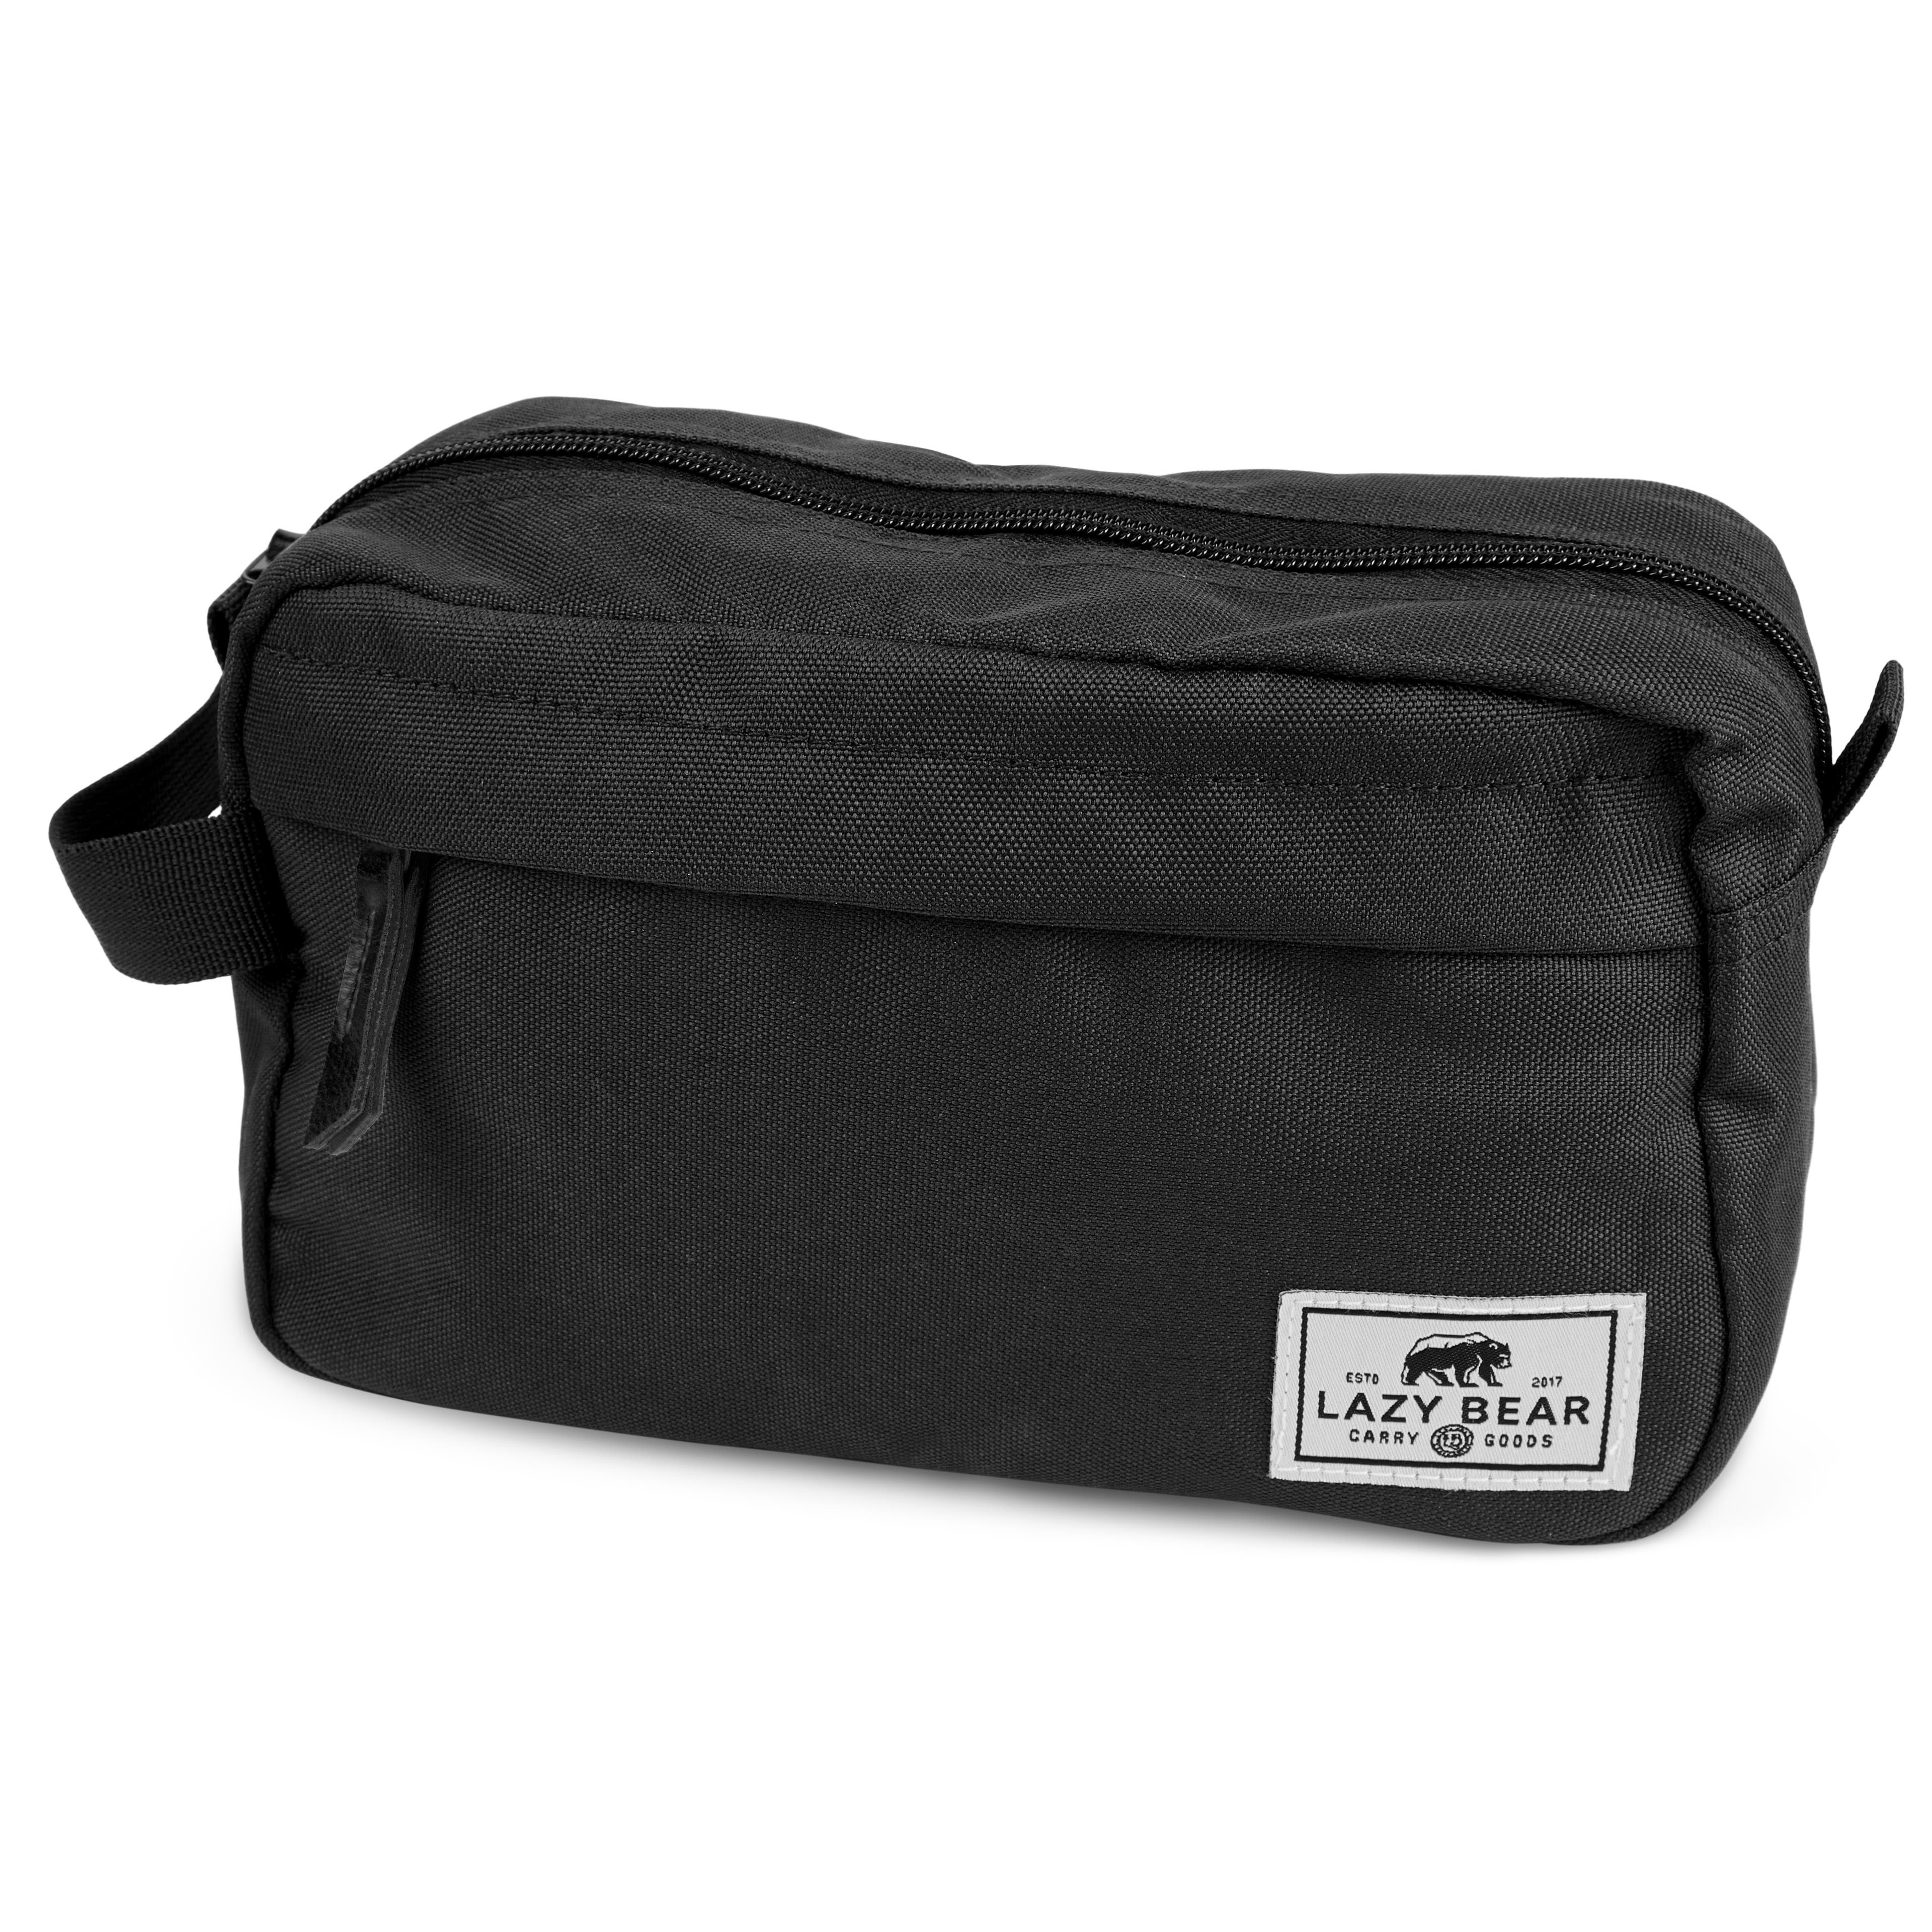 Lewis | Black Polyester & Faux Leather Toiletry Bag